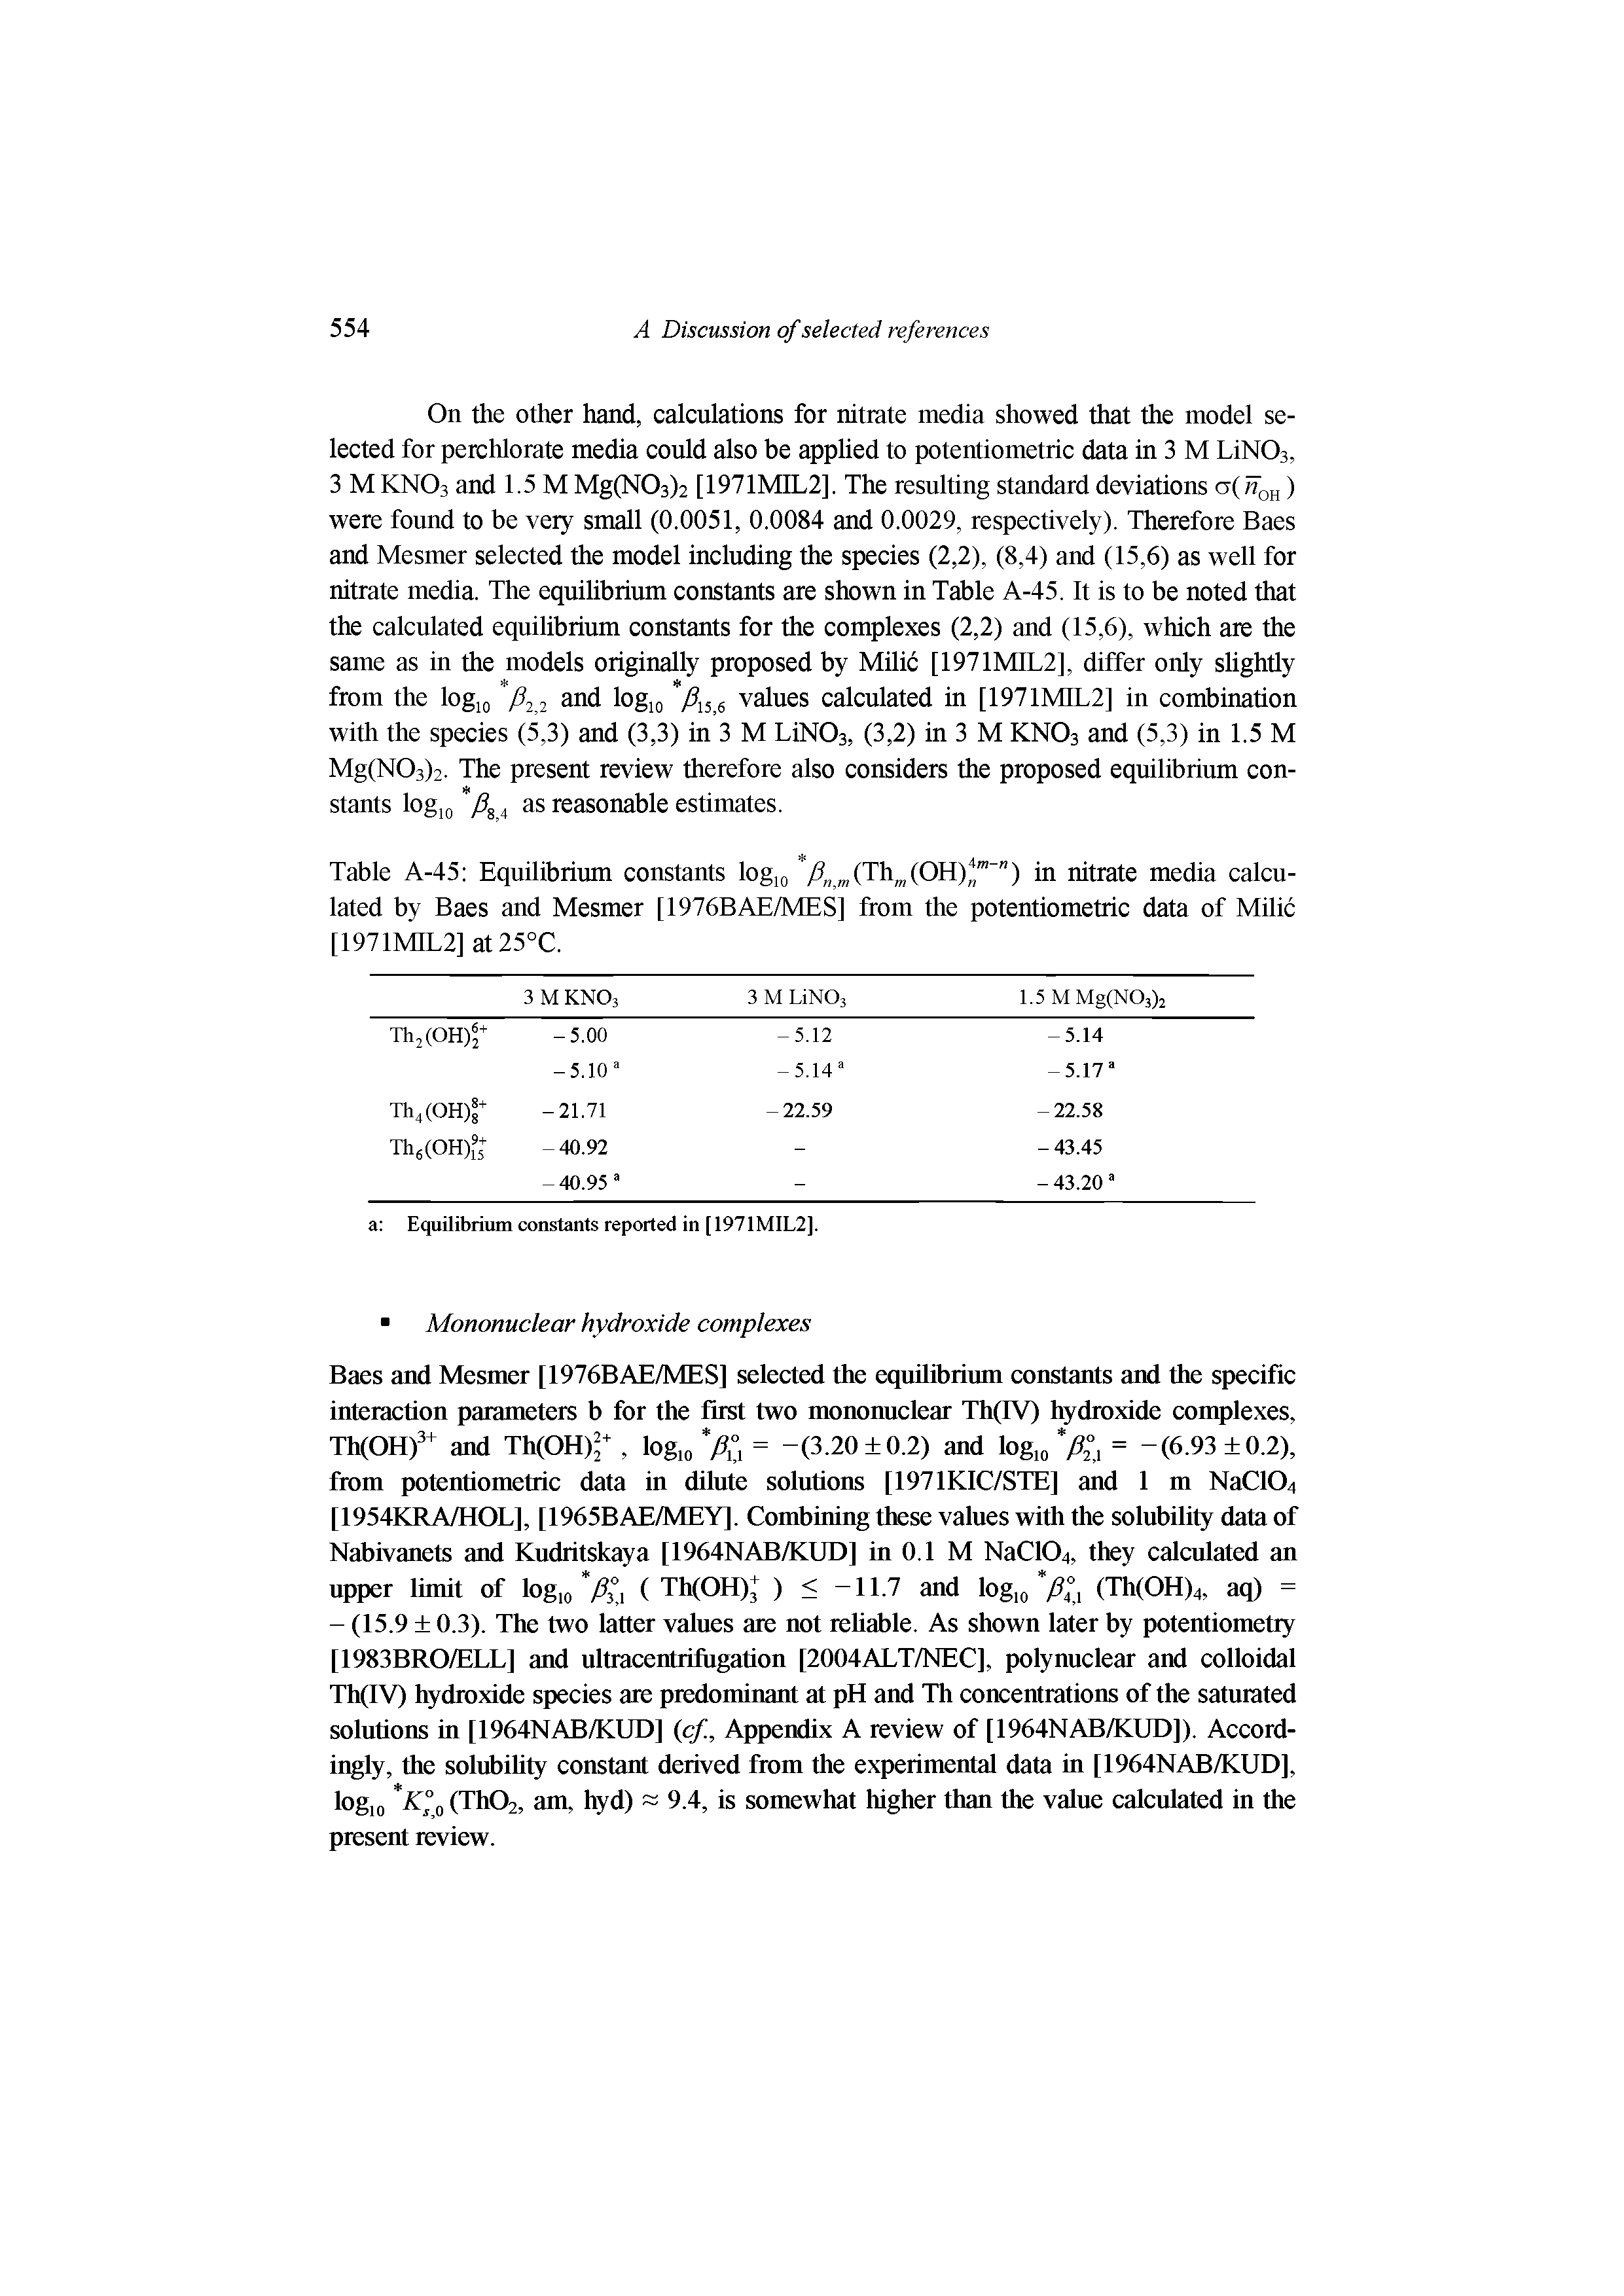 Table A-45 Equilibrium constants logm y ,(Th (OH) " ) in nitrate media calculated by Baes and Mesmer [1976BAE/MES] from the potentiometric data of Milic [1971MIL2] at25°C.